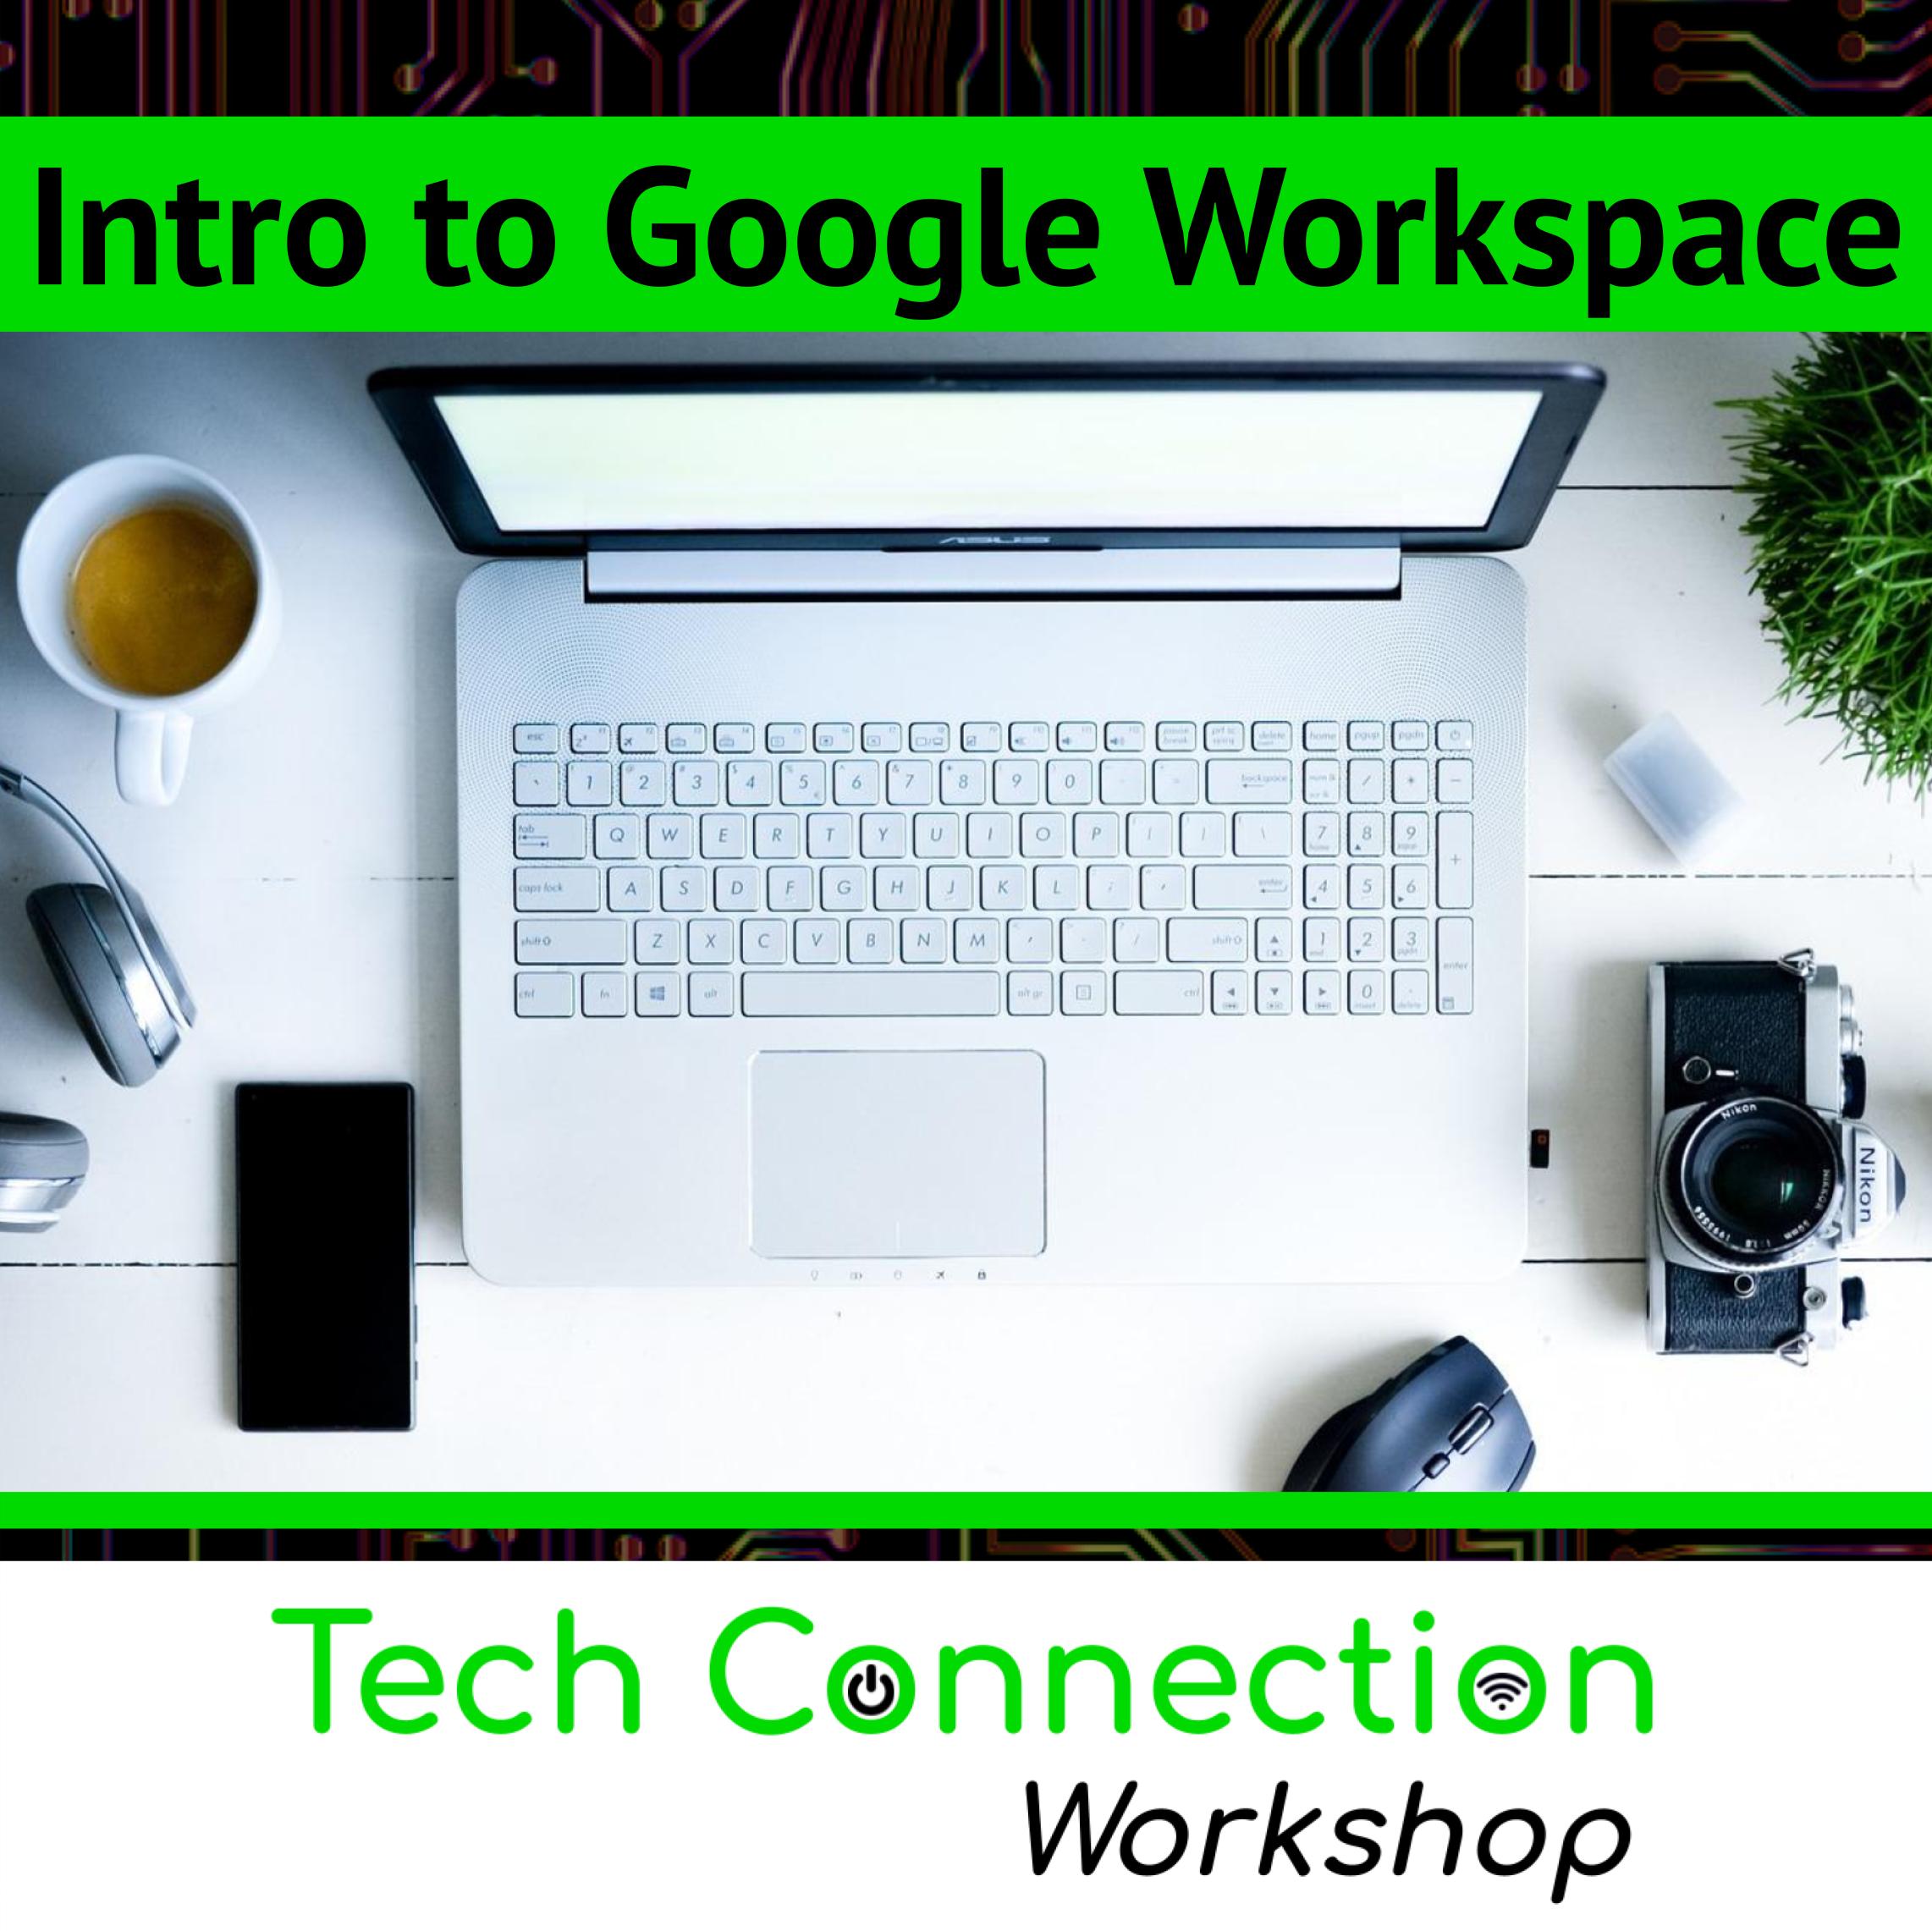 Intro to Google Workspace: Tech Connection Workshop